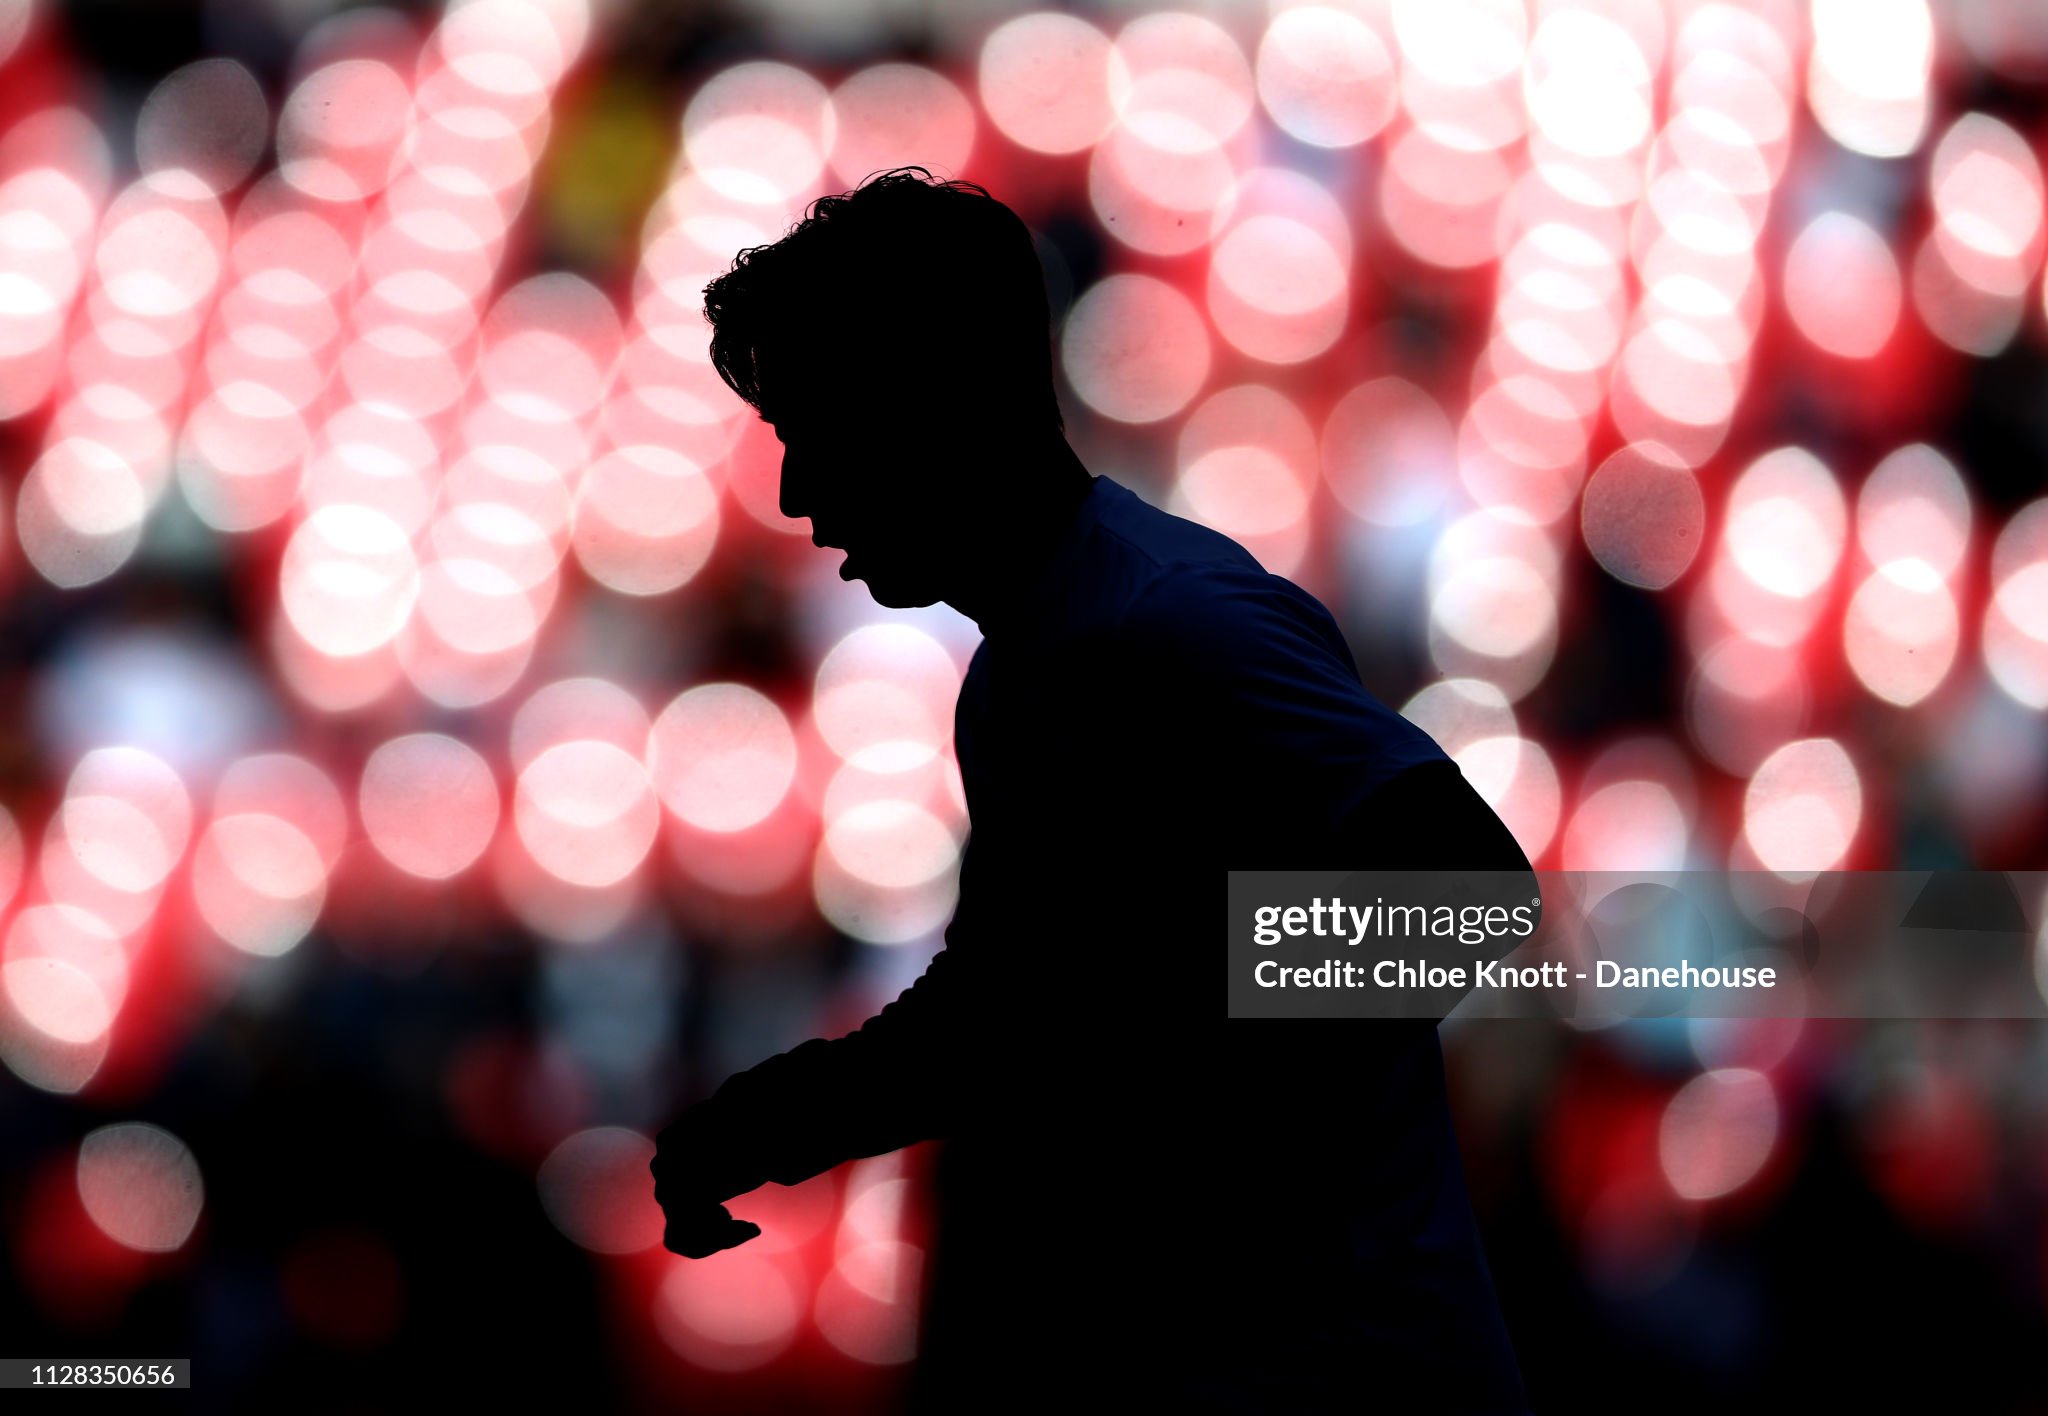 gettyimages-1128350656-2048x2048.jpg